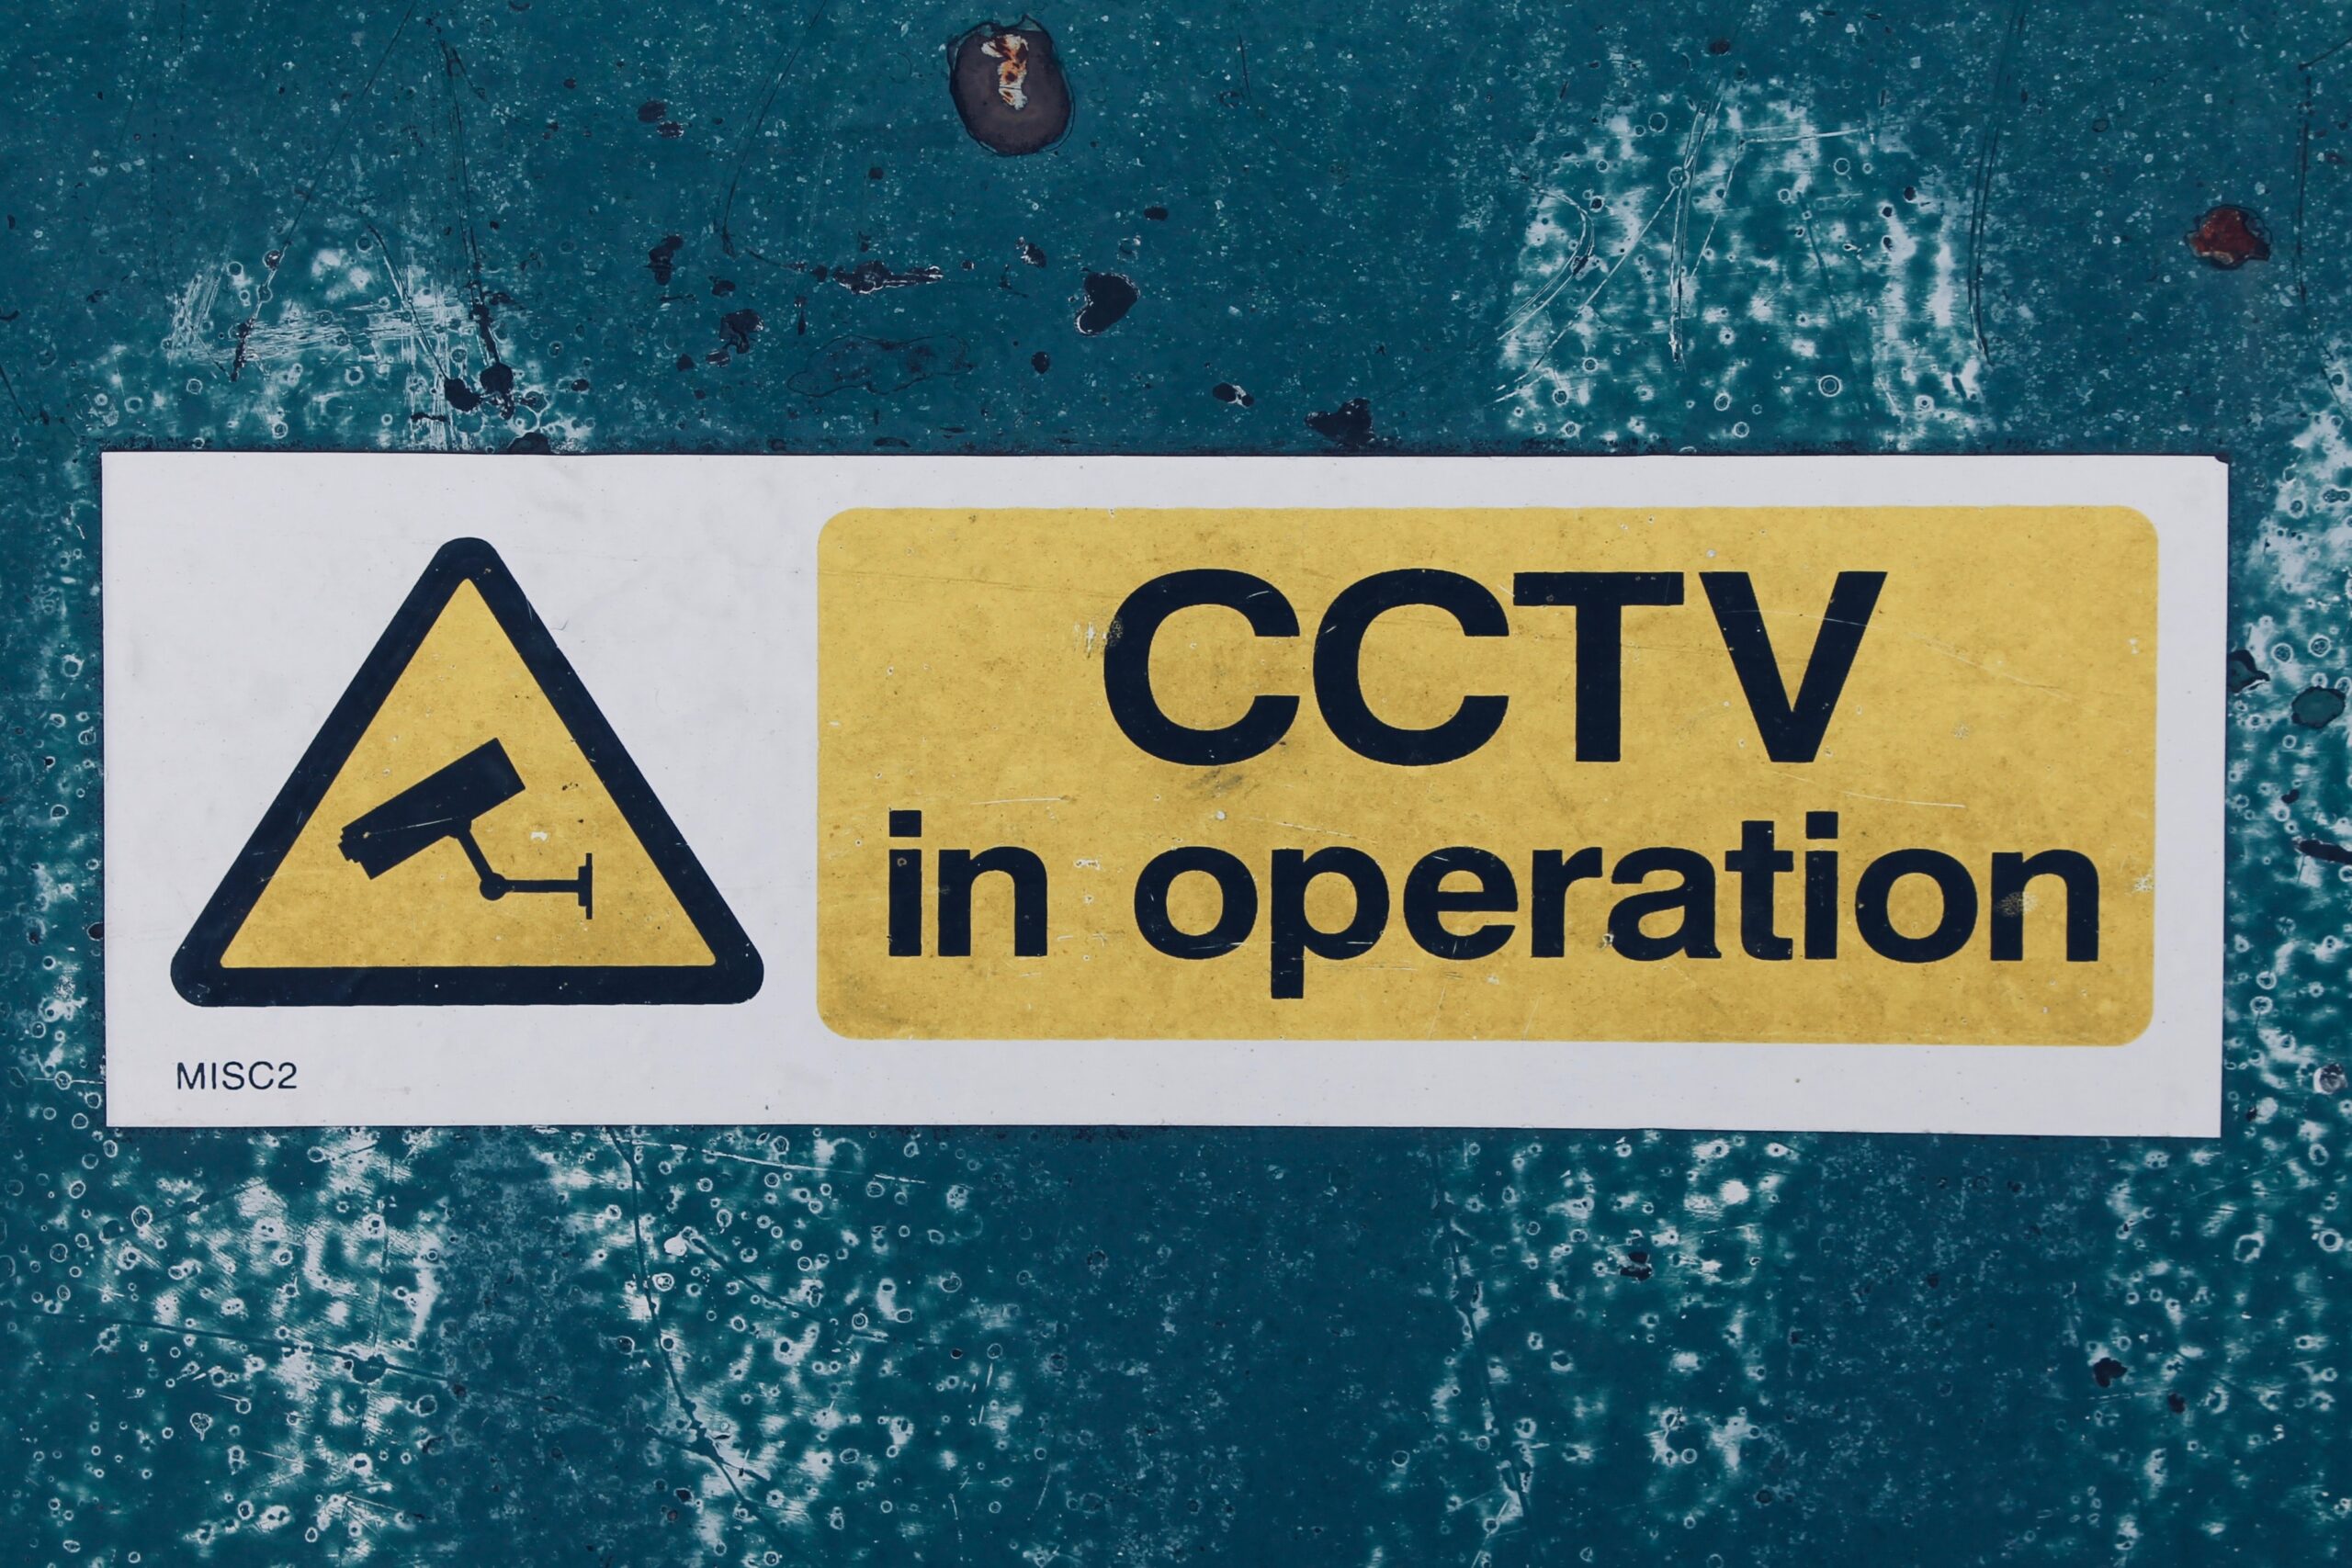 Warning sign indicating that the use of a CCTV system is in operation.